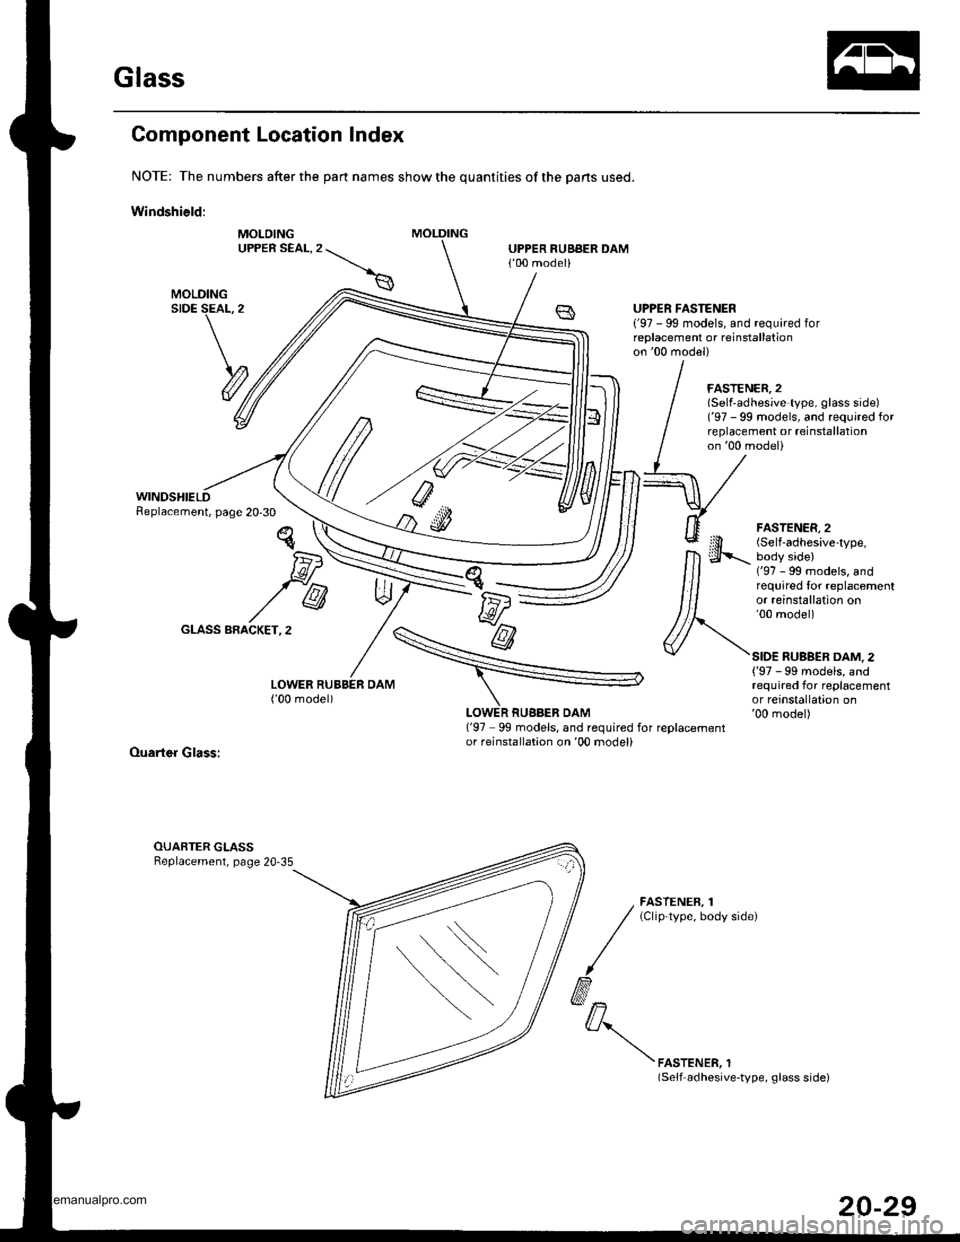 HONDA CR-V 1999 RD1-RD3 / 1.G Workshop Manual 
Glass
Component Location Index
NOTE: The numbers after the part names show the quantities of the pans used.
Windshield:
MOLOINGUPPER SEAL,2UPPER RUBBER DAM100 model)
WINDSHIELDReplacement, page 20-3